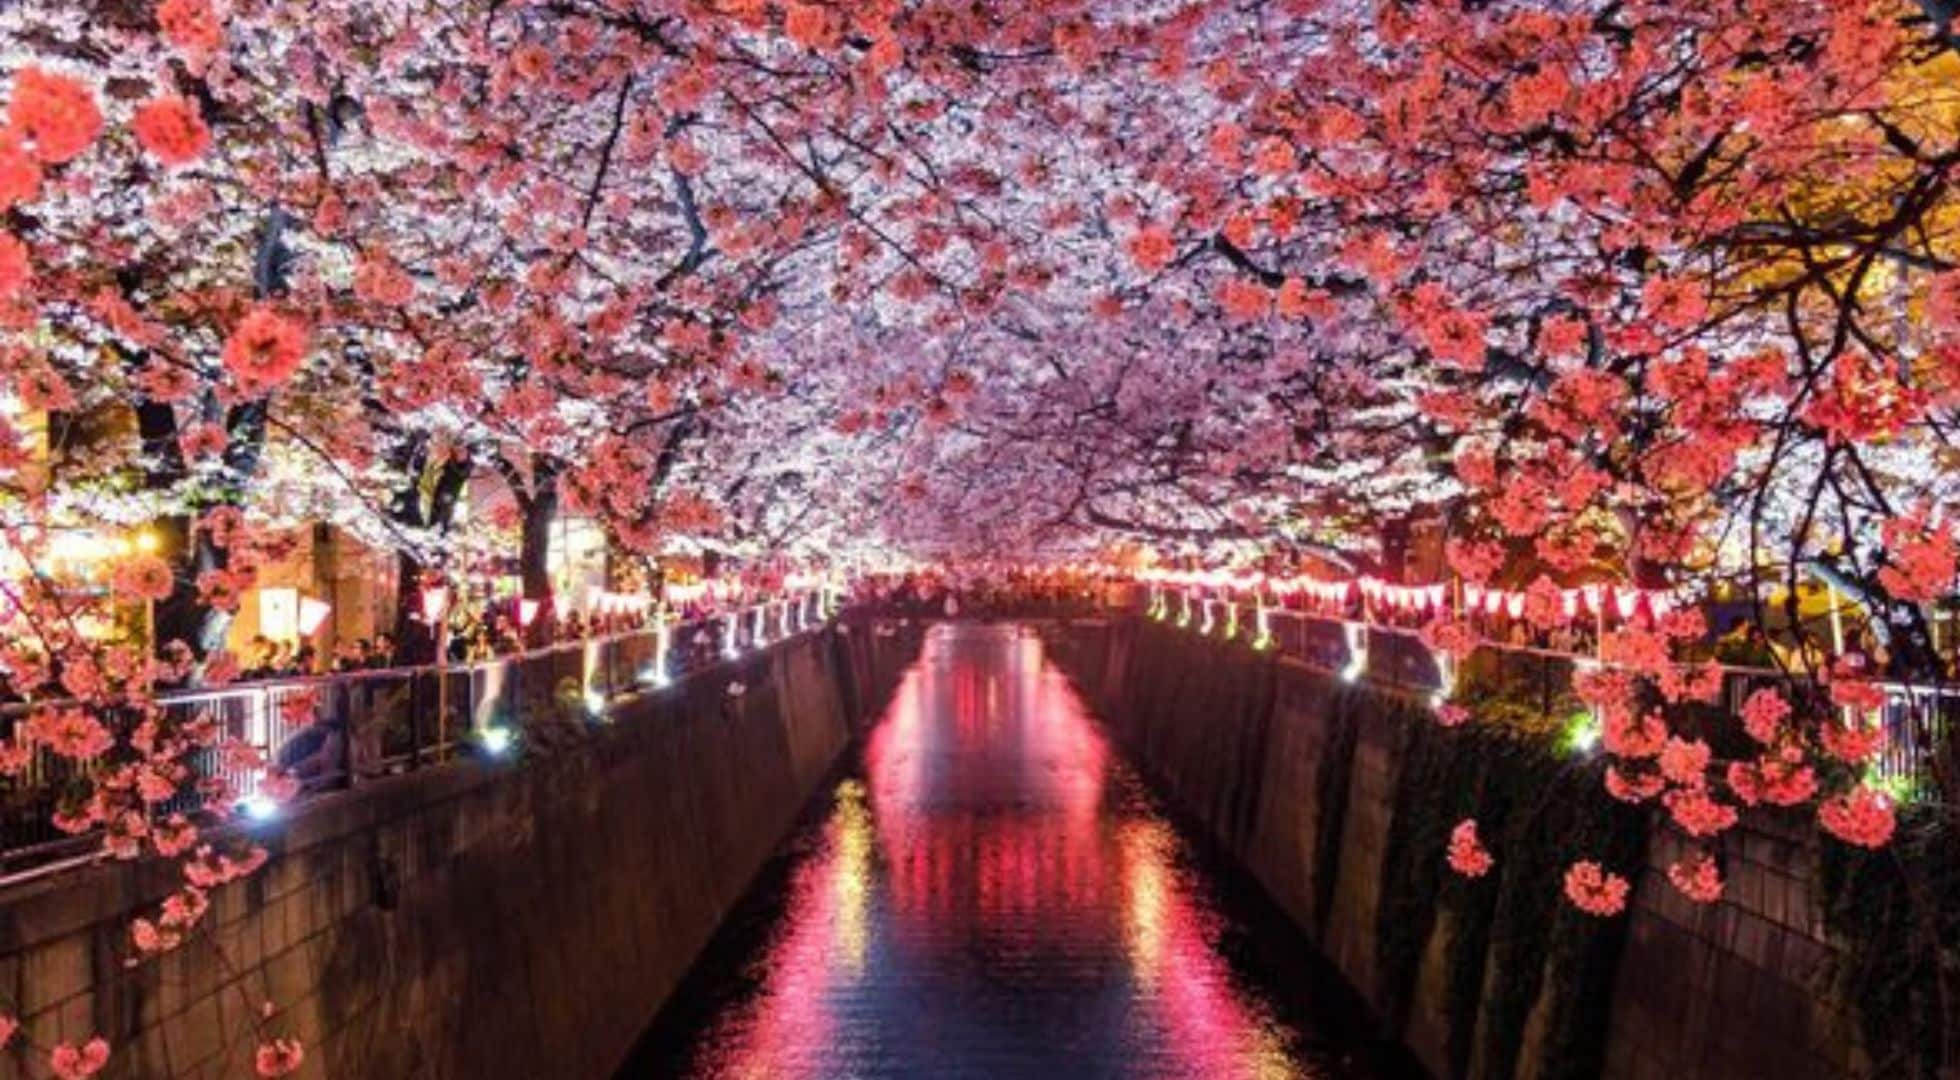 Tokyo at night is when cherry blossoms sparkle